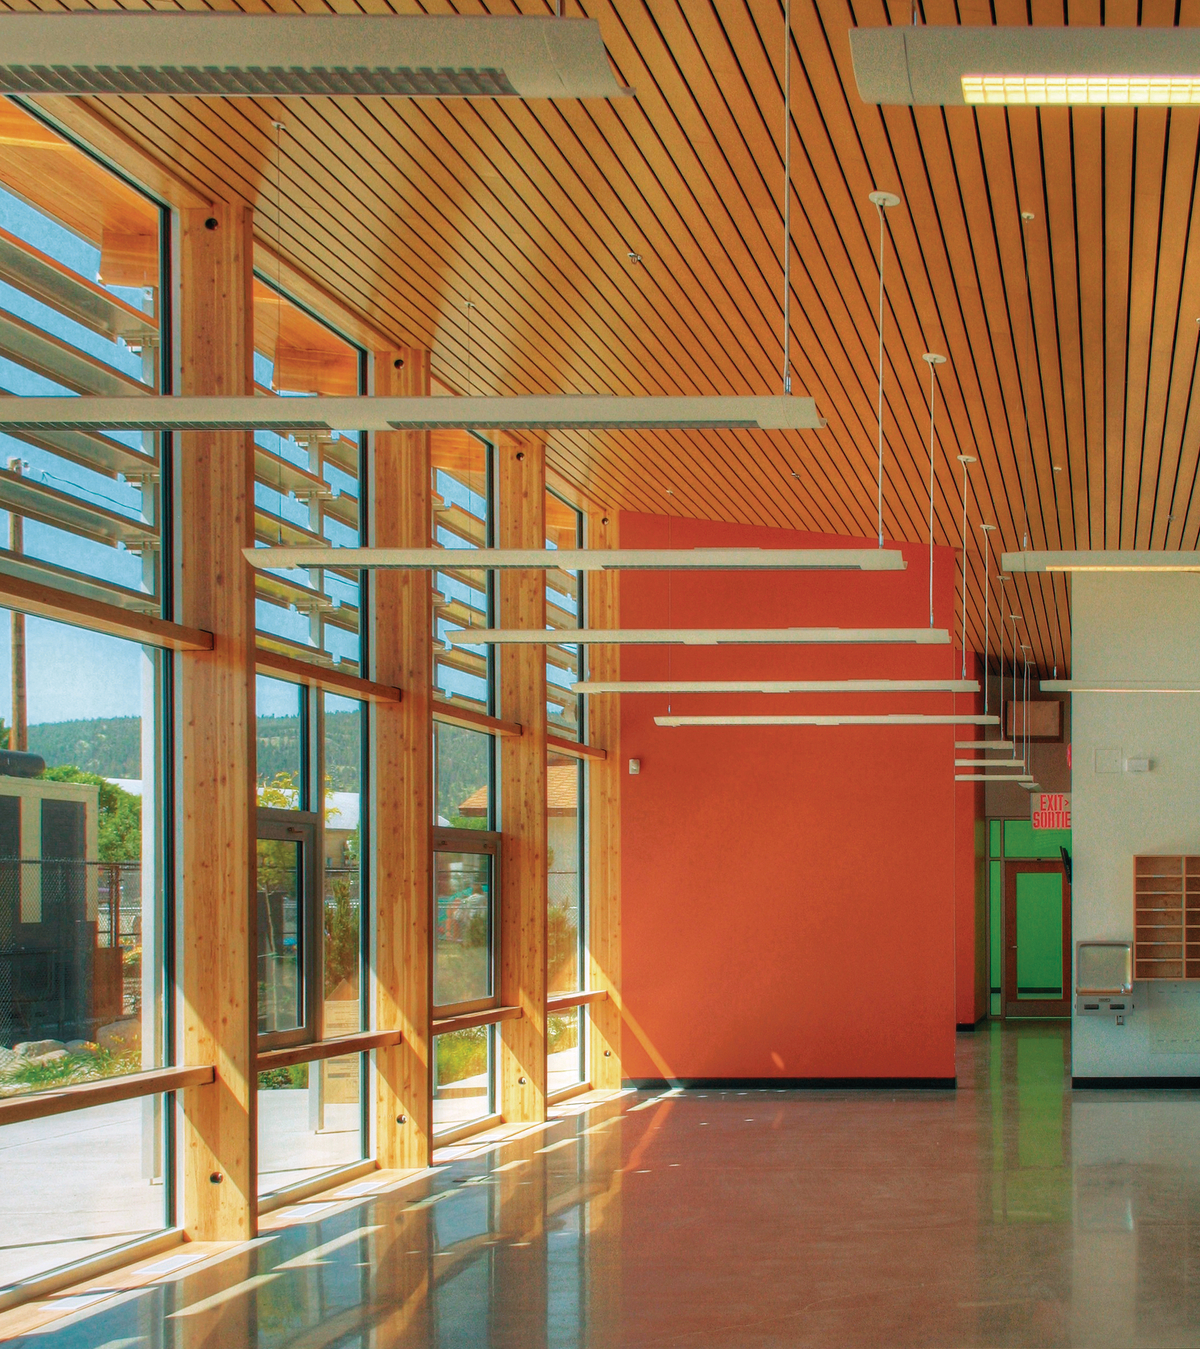 Interior sunny daytime view highlighting use of vertical mass timber columns along with wood trim and decorative dimensional lumber ceiling inside newly completed Summerland RCMP Detachment